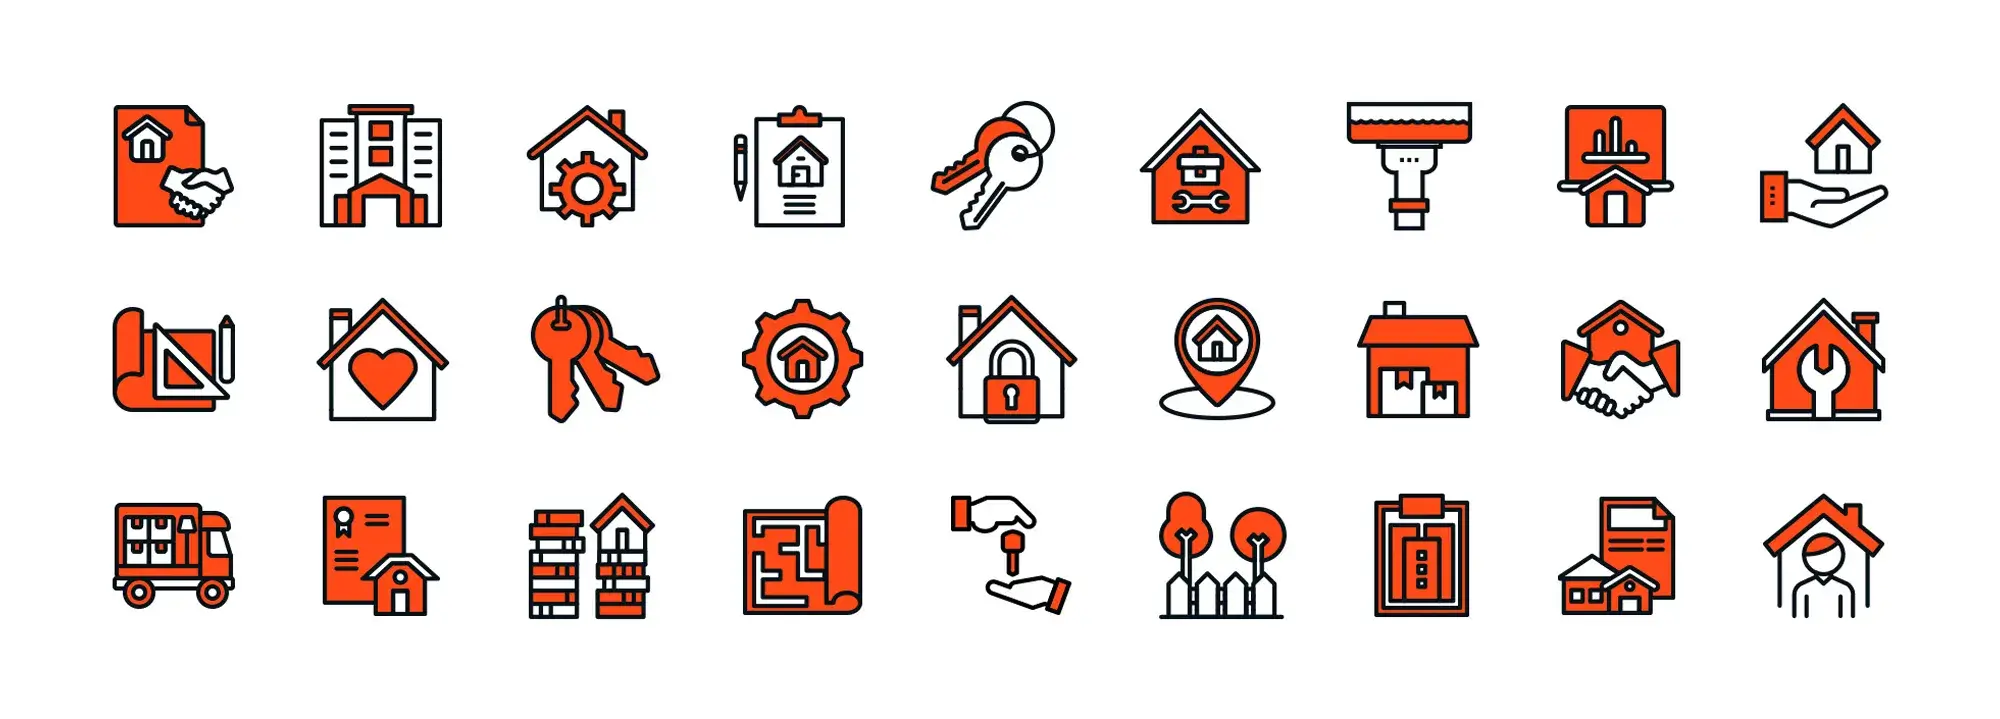 Where to Find the Best Free Icons for Your WordPress Site